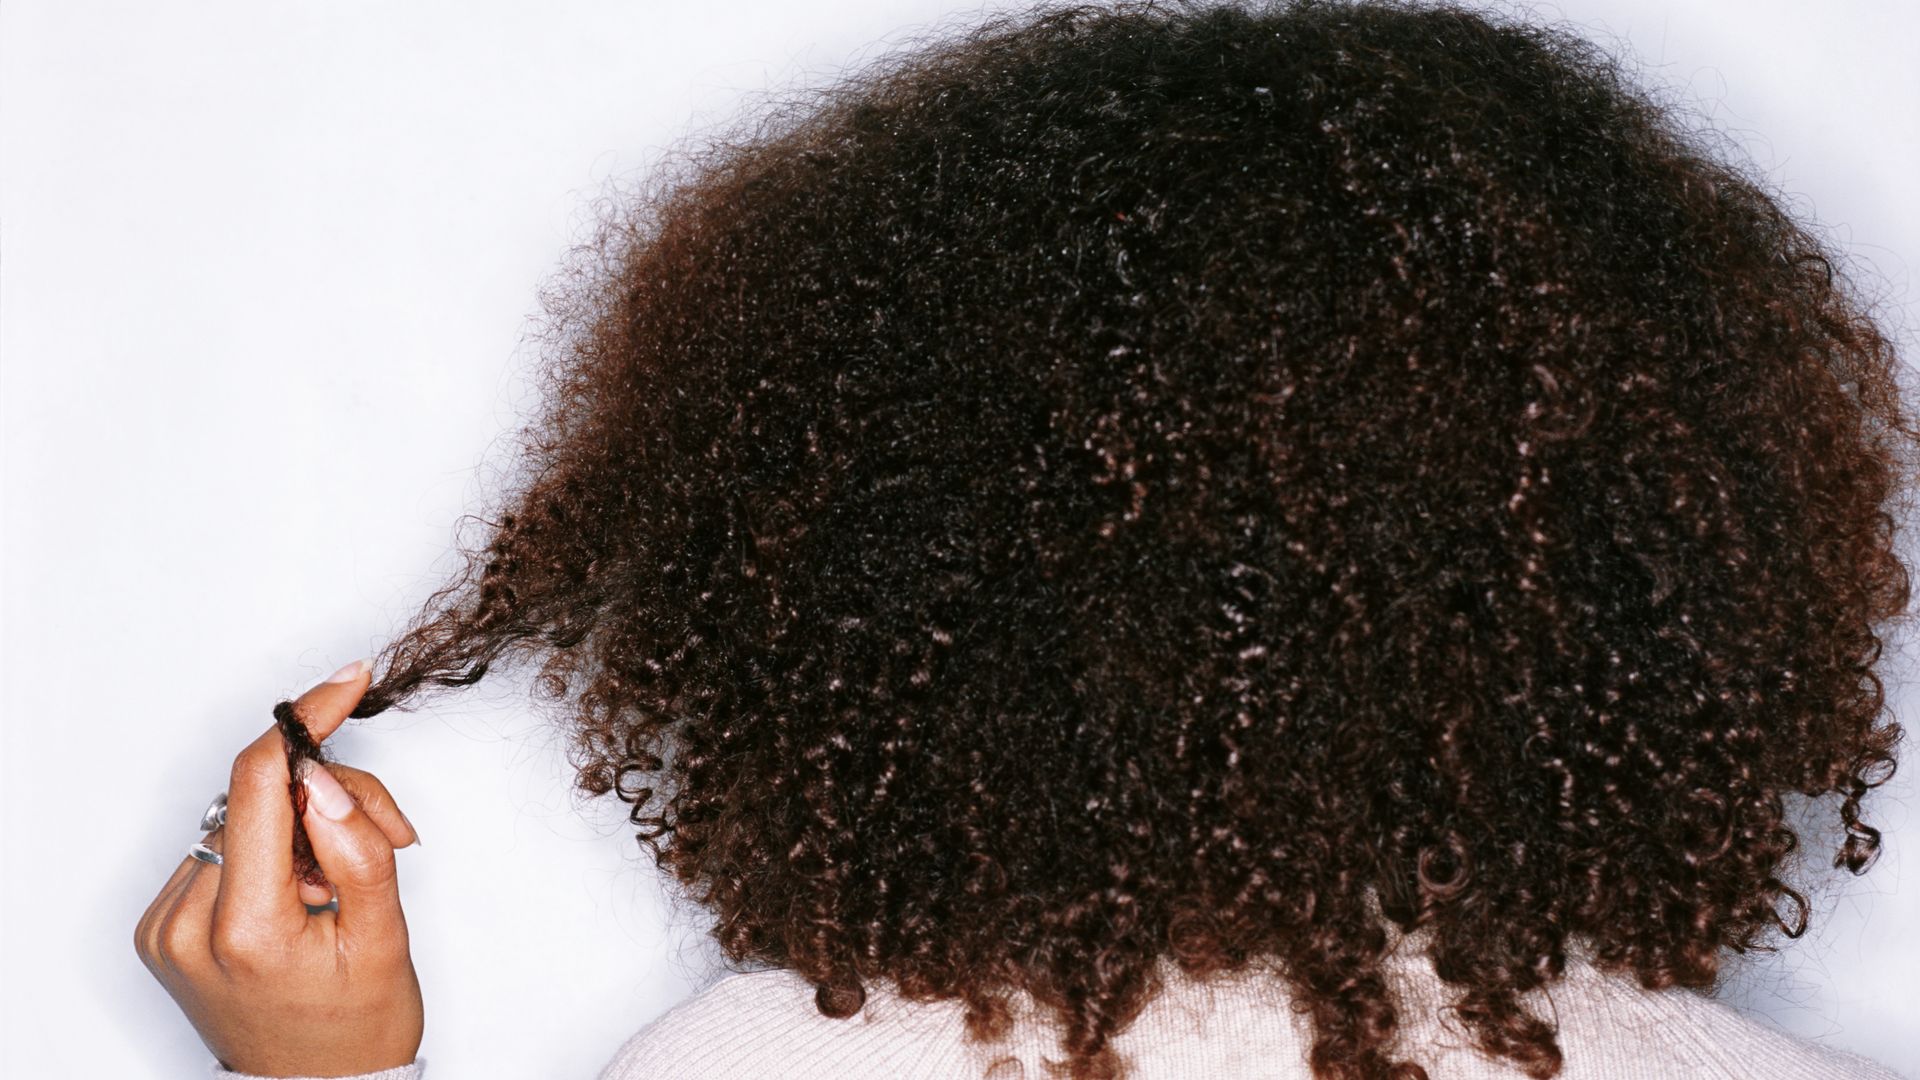 My dehydrated curls need extra love in winter - here’s how I look after them